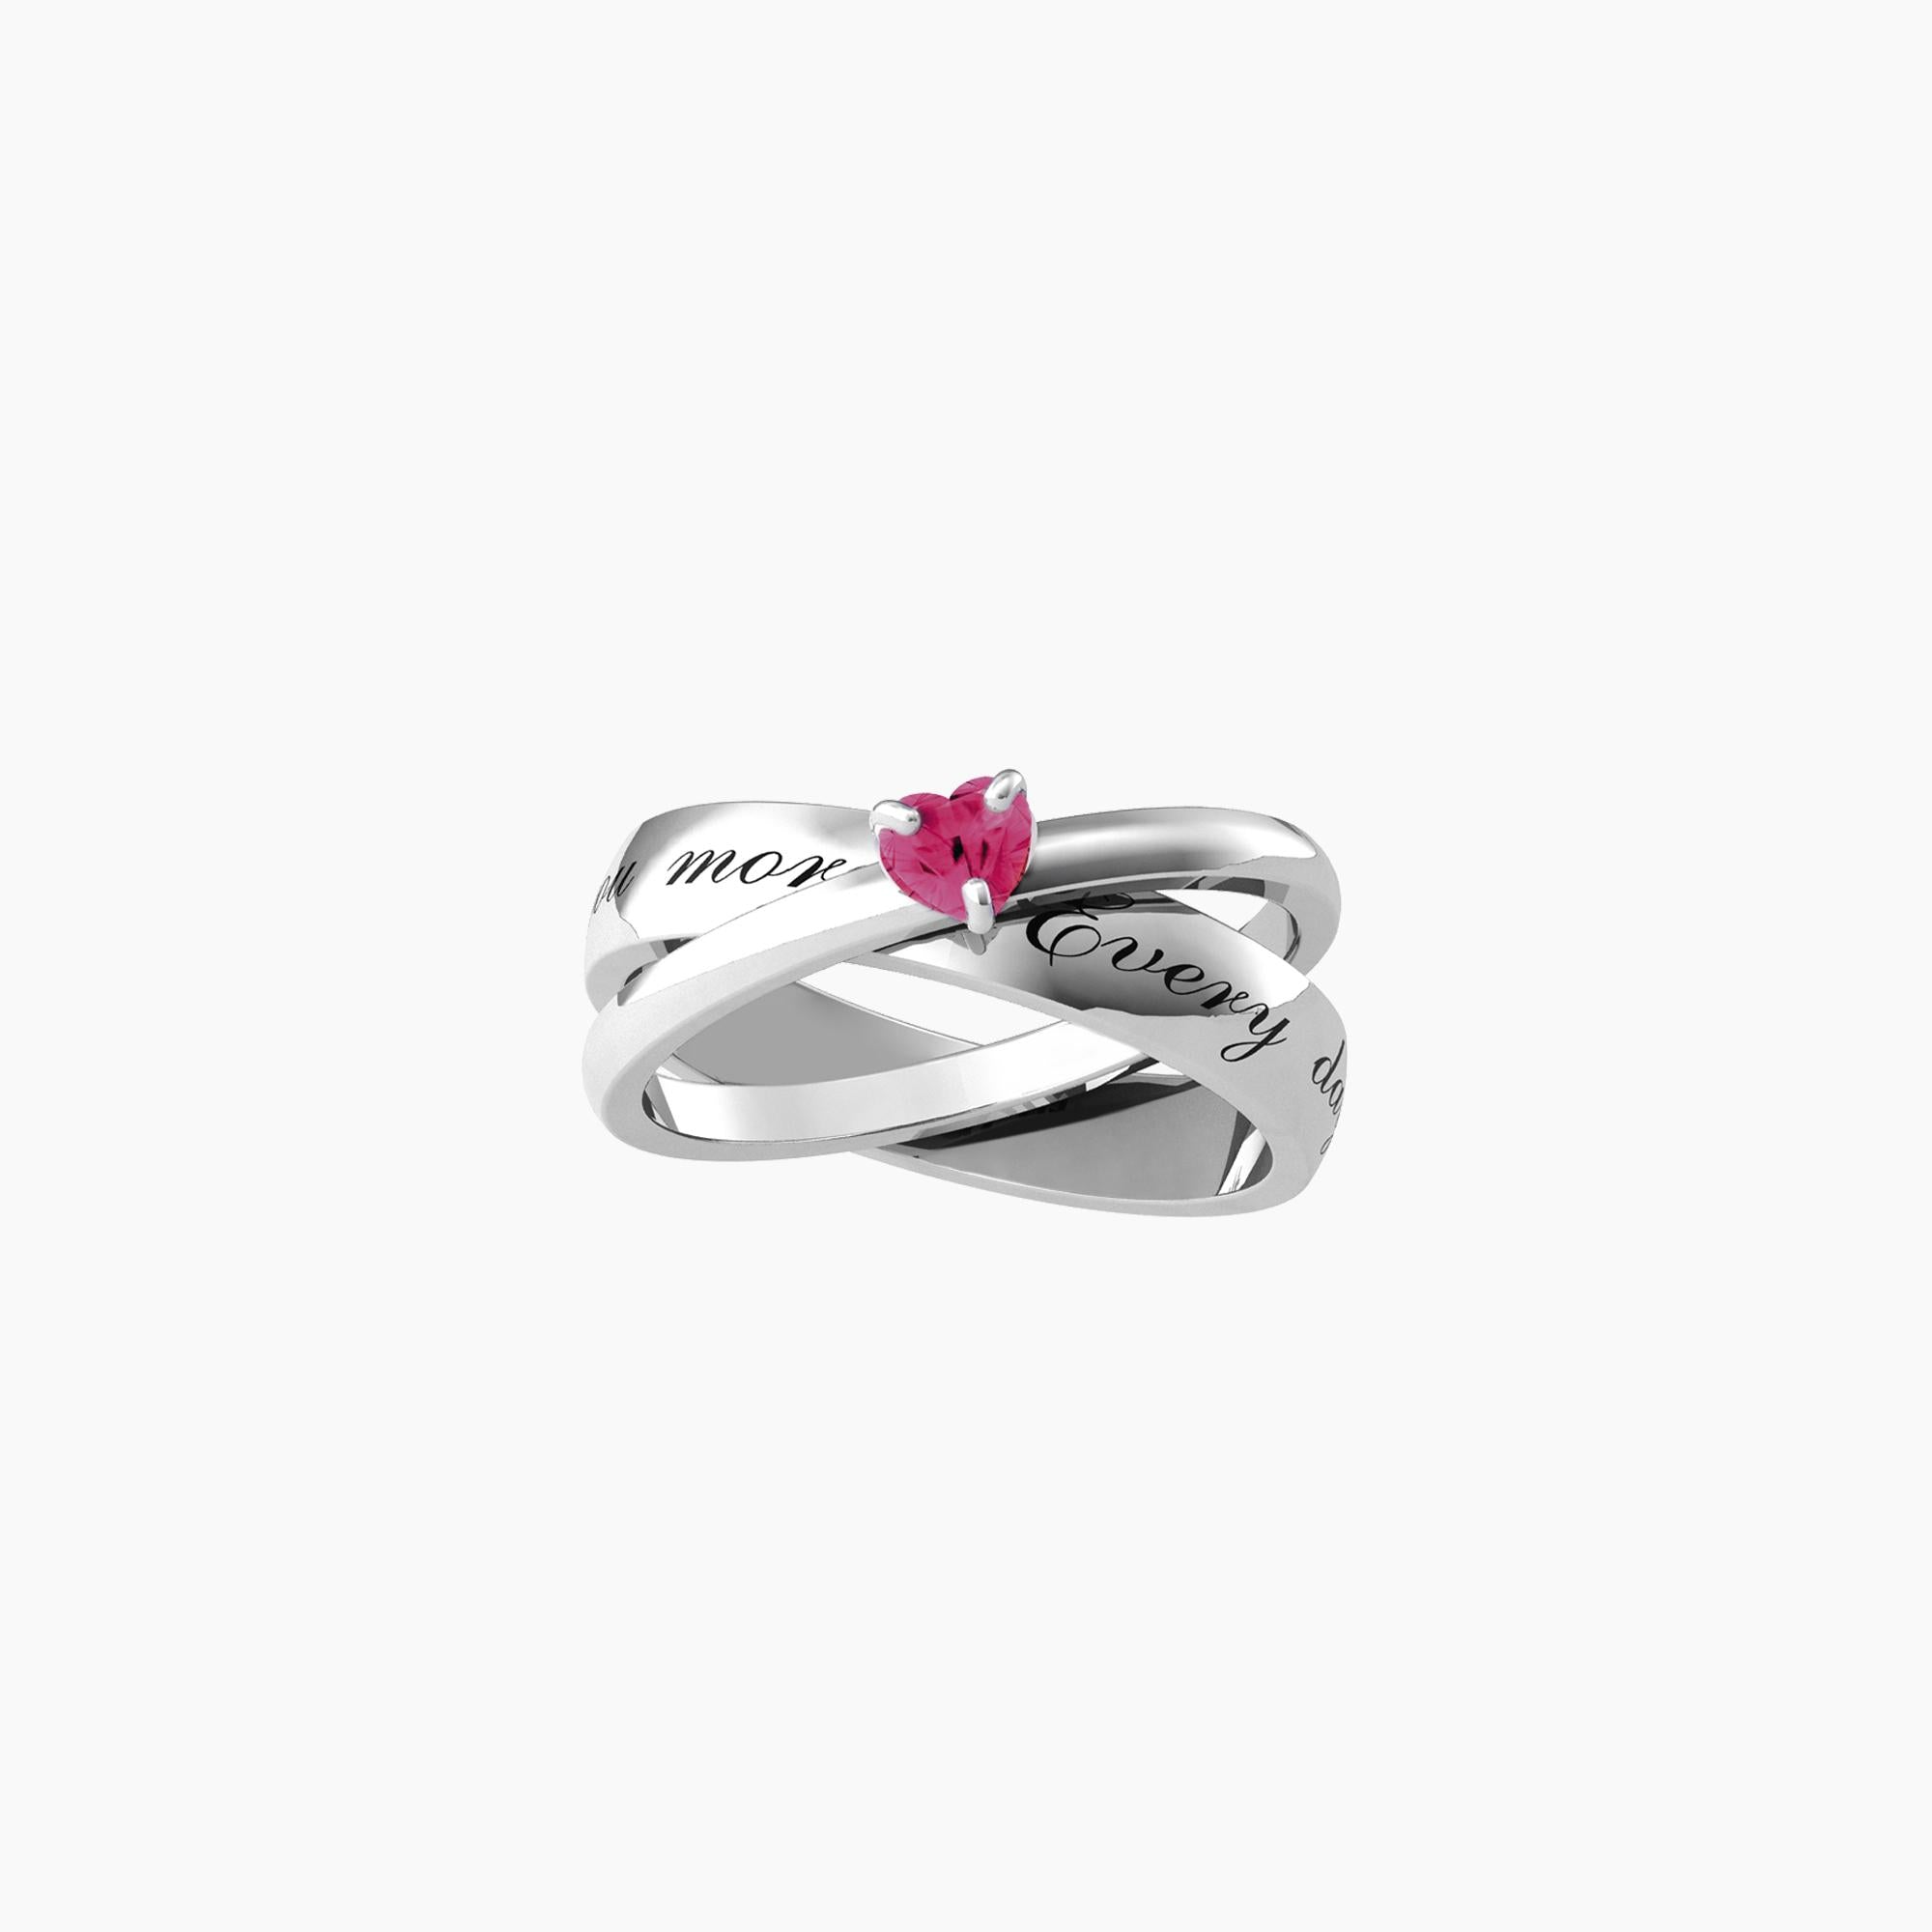 Bague entrelacée avec rubis synthétique taille coeur EVERY DAY - 721003